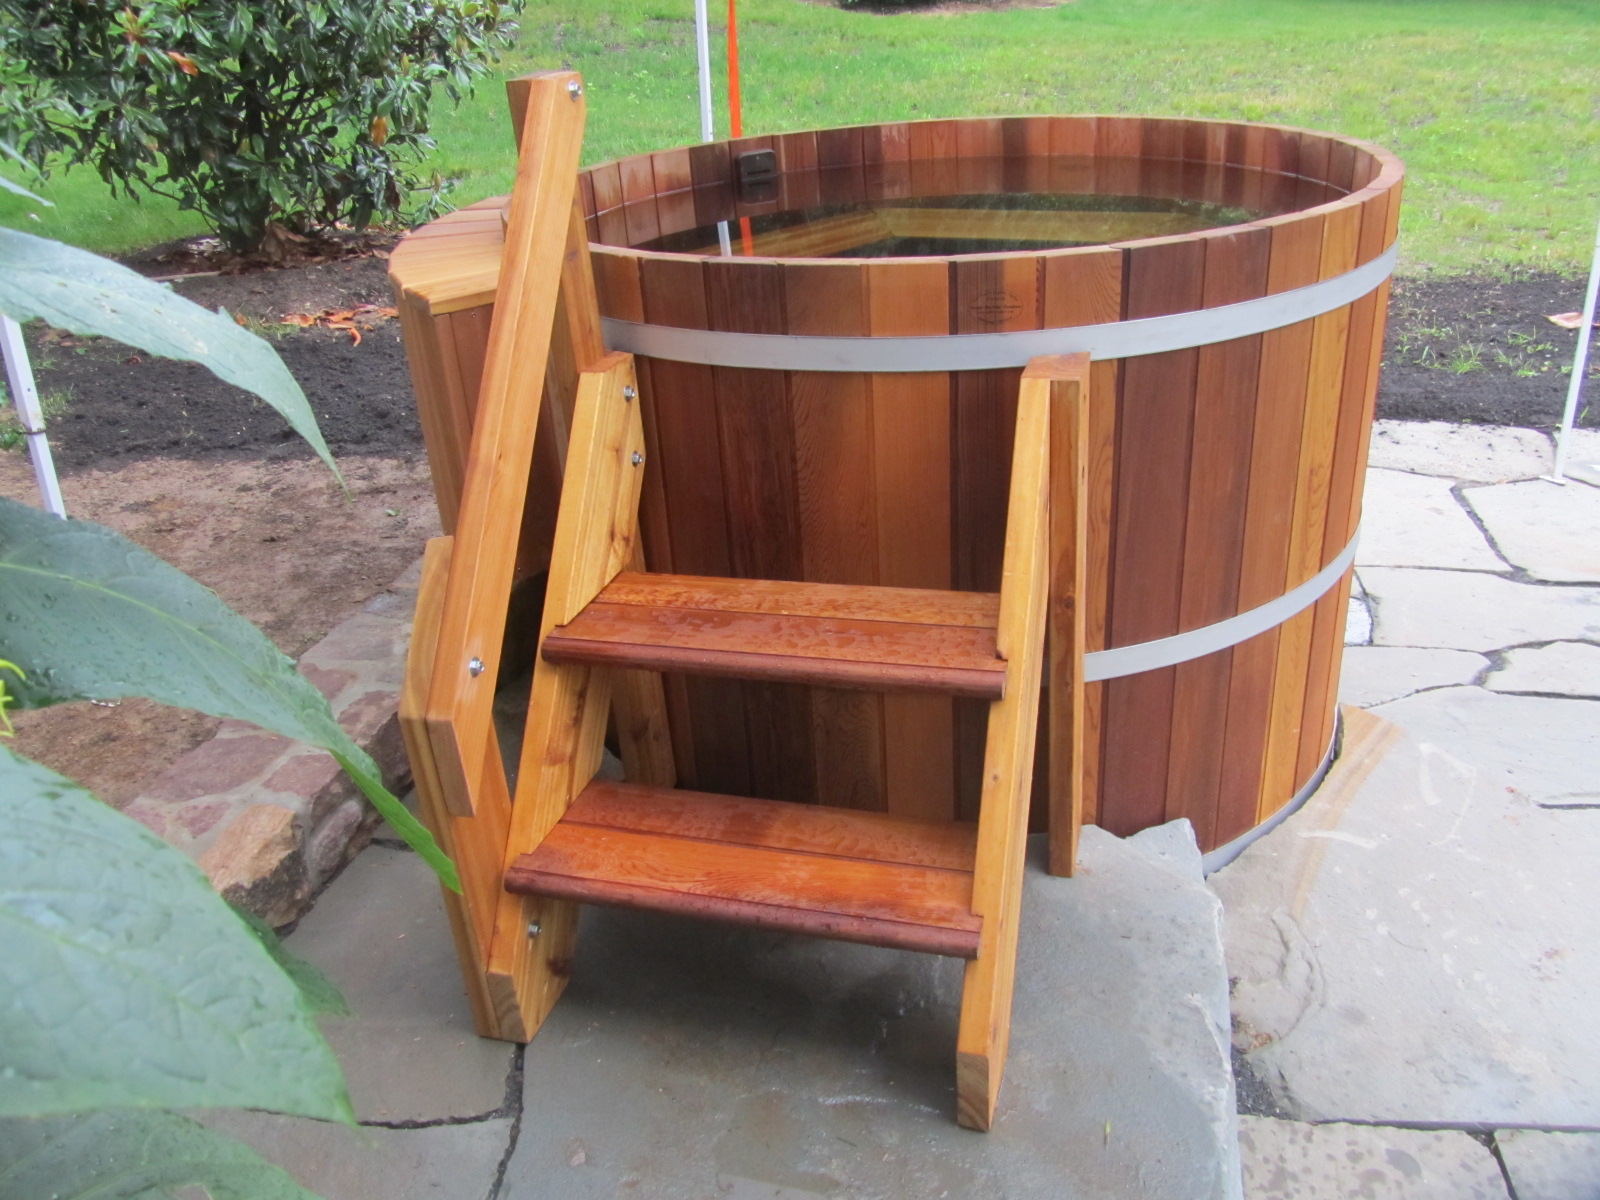 4 Person Wood Hot Tub - Electric Heater with jets